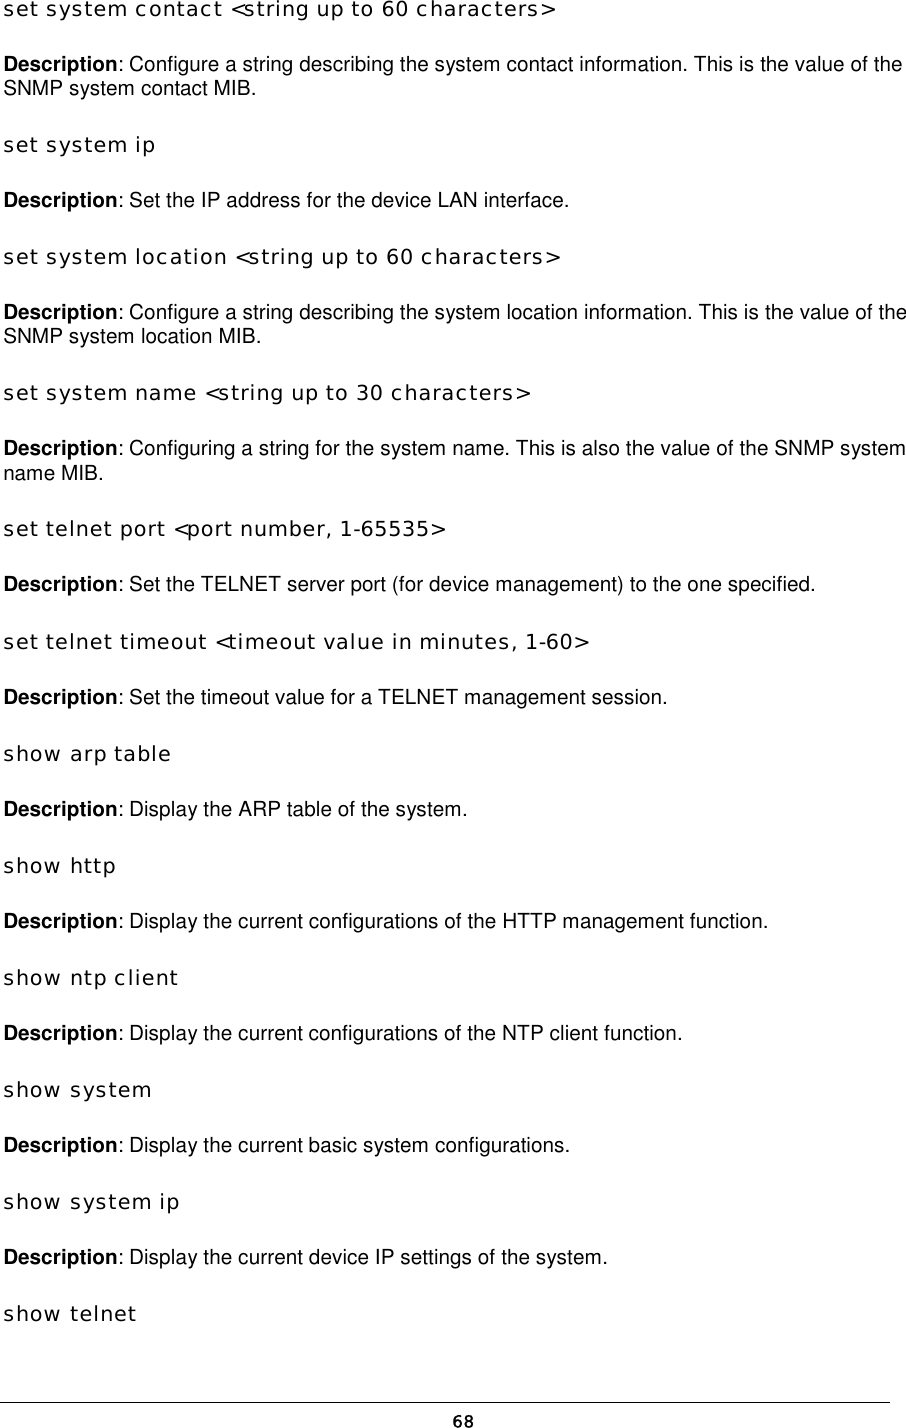  set system contact &lt;string up to 60 characters&gt;  Description: Configure a string describing the system contact information. This is the value of the SNMP system contact MIB.  set system ip  Description: Set the IP address for the device LAN interface.  set system location &lt;string up to 60 characters&gt;  Description: Configure a string describing the system location information. This is the value of the SNMP system location MIB.  set system name &lt;string up to 30 characters&gt;  Description: Configuring a string for the system name. This is also the value of the SNMP system name MIB.  set telnet port &lt;port number, 1-65535&gt;  Description: Set the TELNET server port (for device management) to the one specified.  set telnet timeout &lt;timeout value in minutes, 1-60&gt;  Description: Set the timeout value for a TELNET management session.  show arp table  Description: Display the ARP table of the system.  show http  Description: Display the current configurations of the HTTP management function.  show ntp client  Description: Display the current configurations of the NTP client function.  show system  Description: Display the current basic system configurations.  show system ip  Description: Display the current device IP settings of the system.  show telnet   68